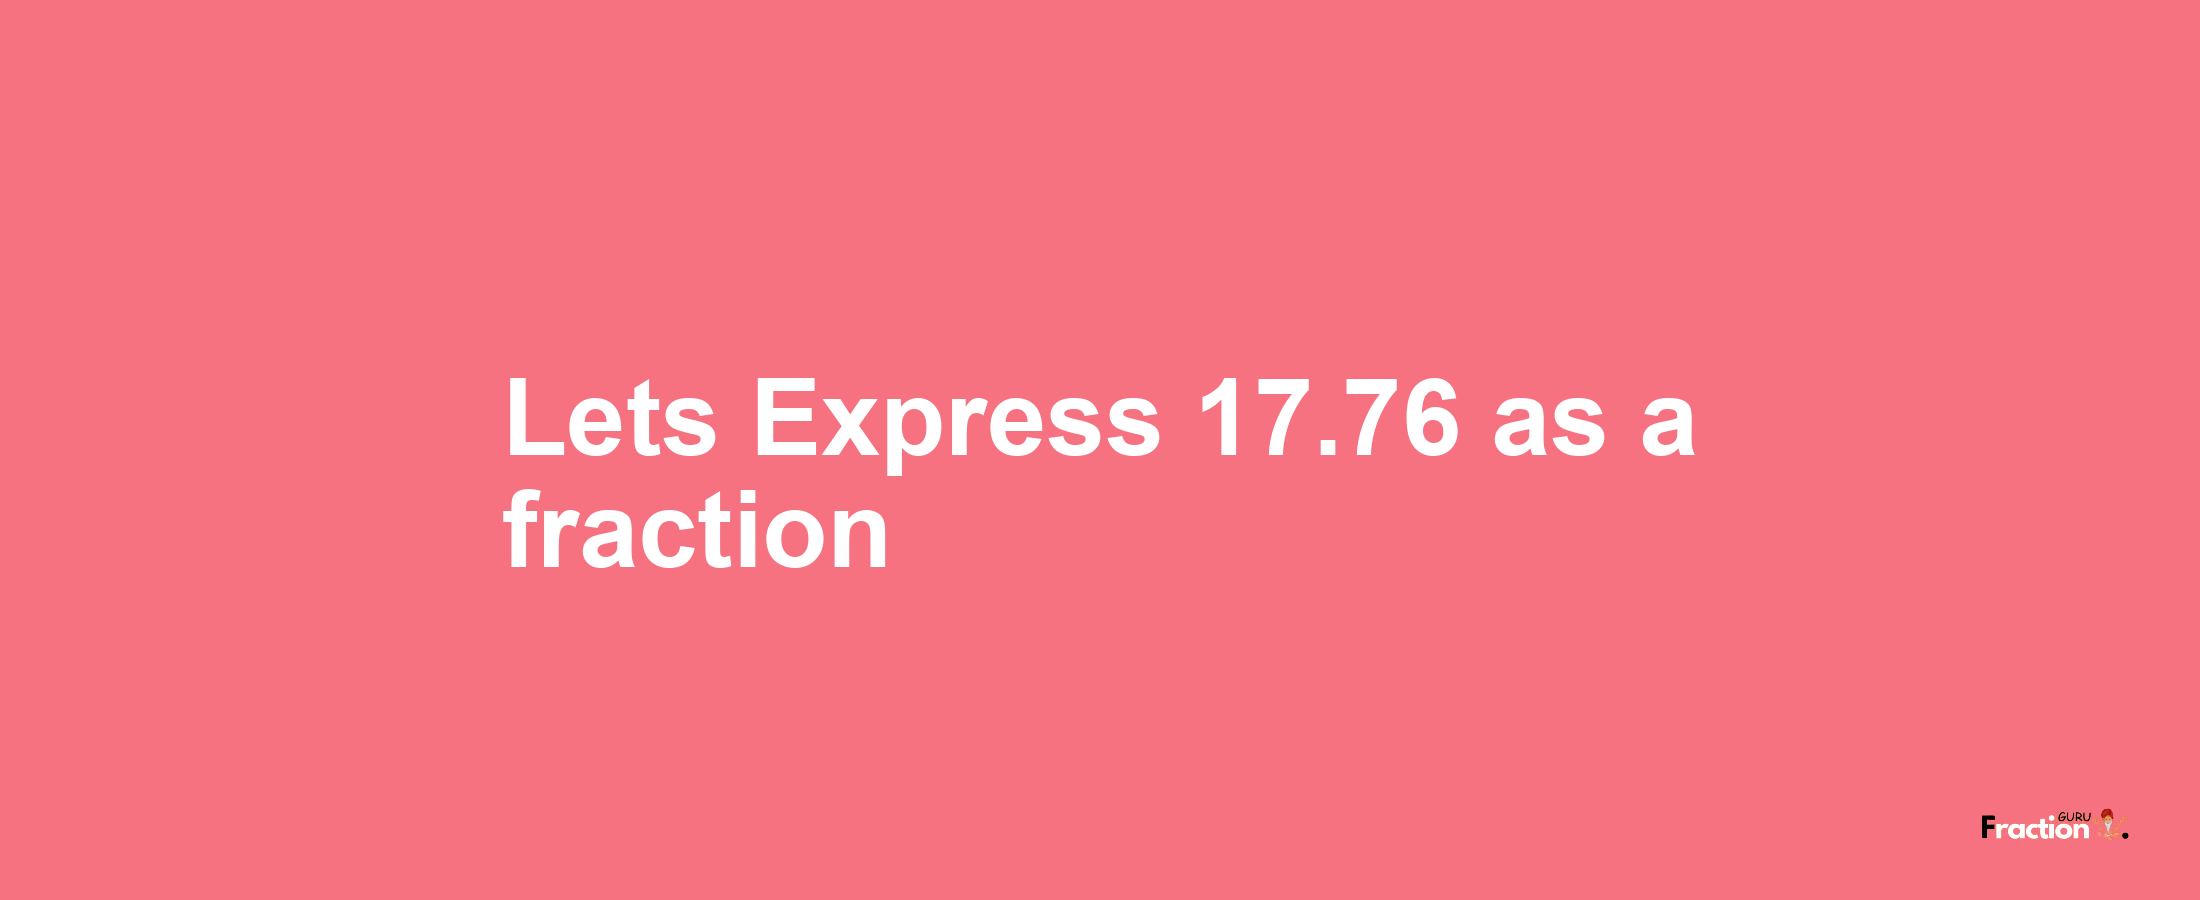 Lets Express 17.76 as afraction